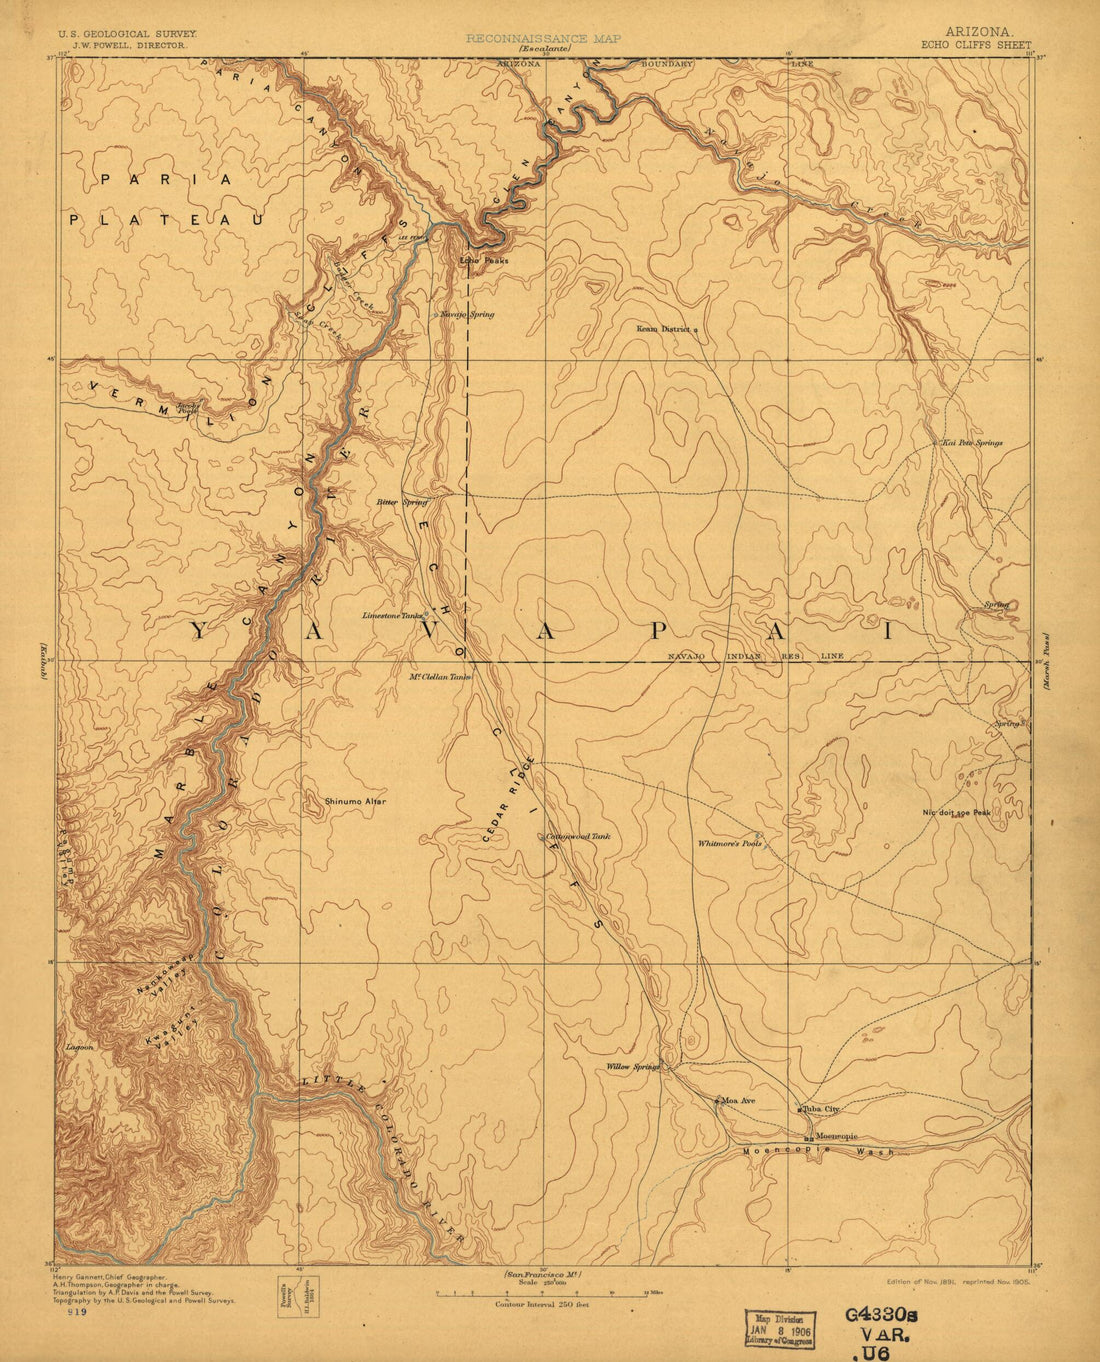 This old map of Arizona from 1891 was created by  Geological Survey (U.S.) in 1891